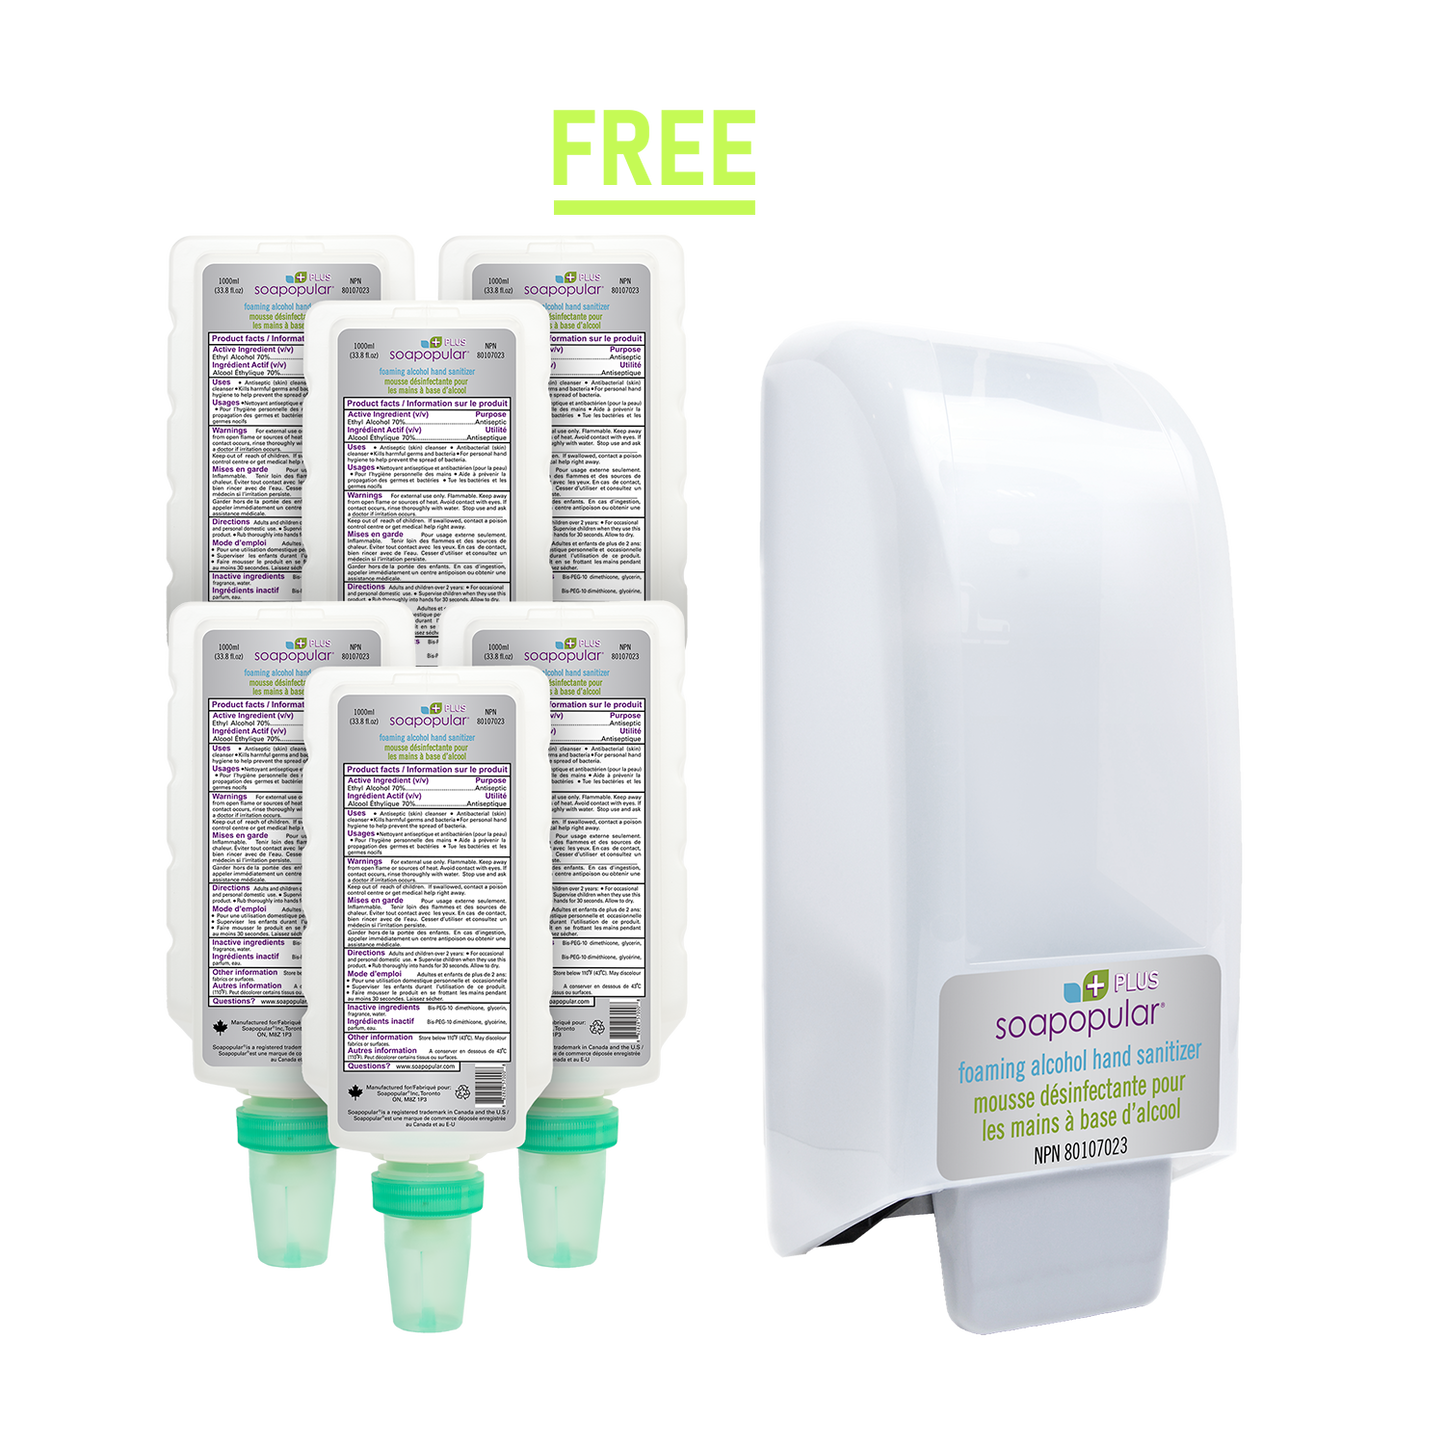 PROMOTION*  Soapopular Plus® 70% Alcohol Foam Hand Sanitizer 1 L Cartridge Refill (6PK)  &  Receive 1 FREE  Wall Covered Dispenser